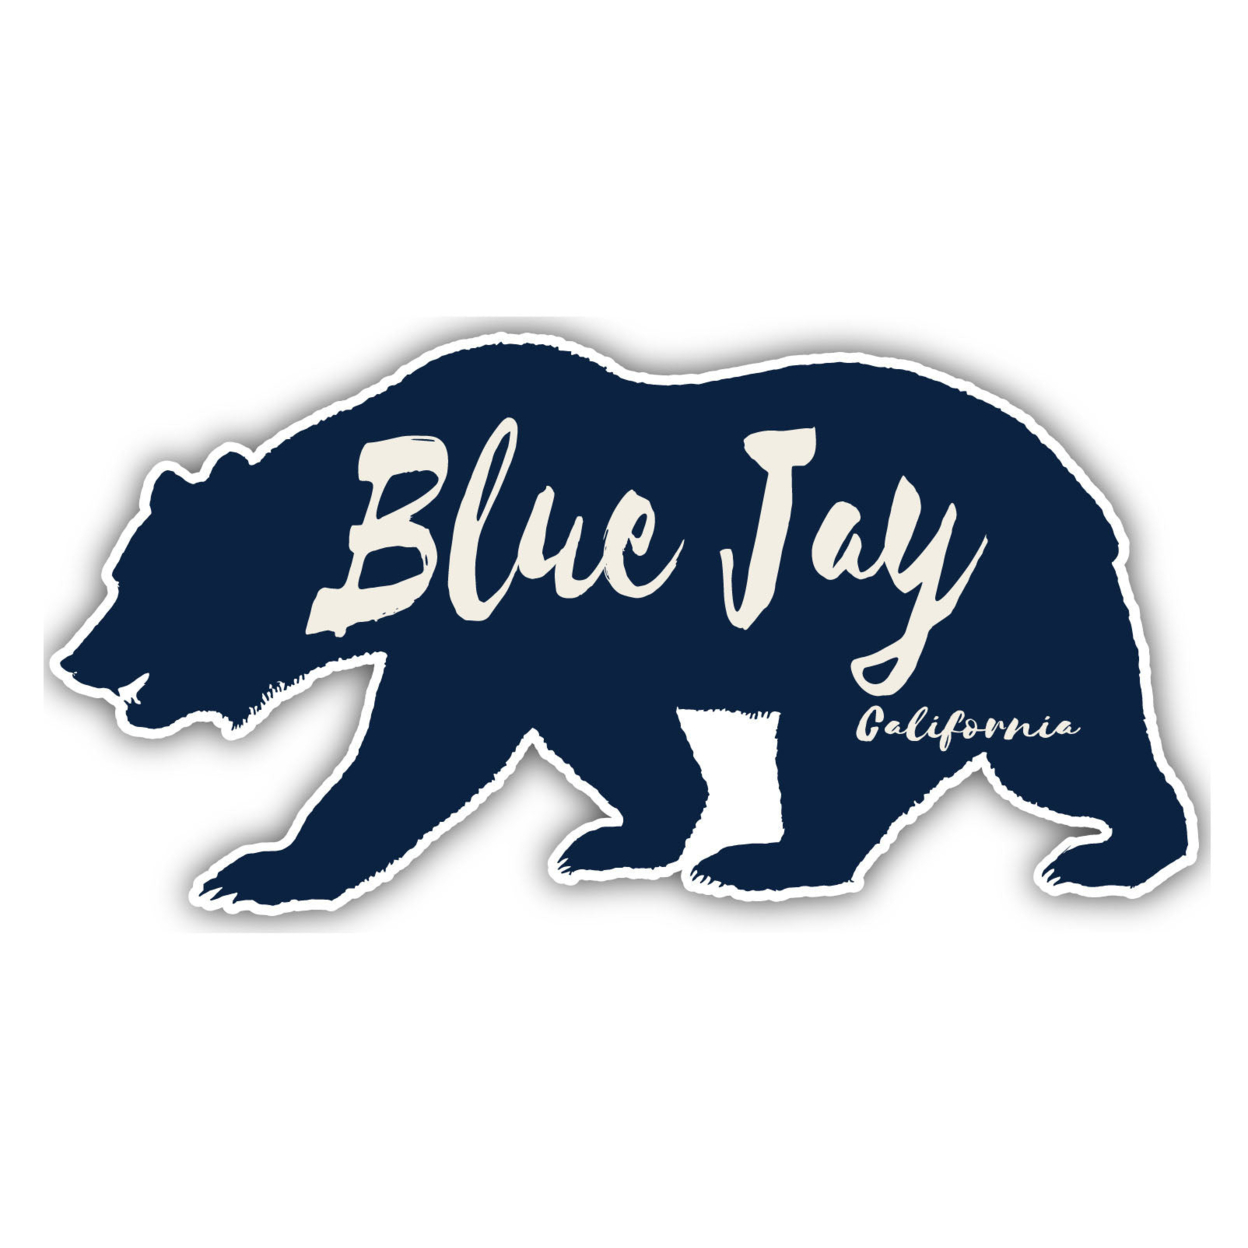 Blue Jay California Souvenir Decorative Stickers (Choose Theme And Size) - 4-Pack, 10-Inch, Bear